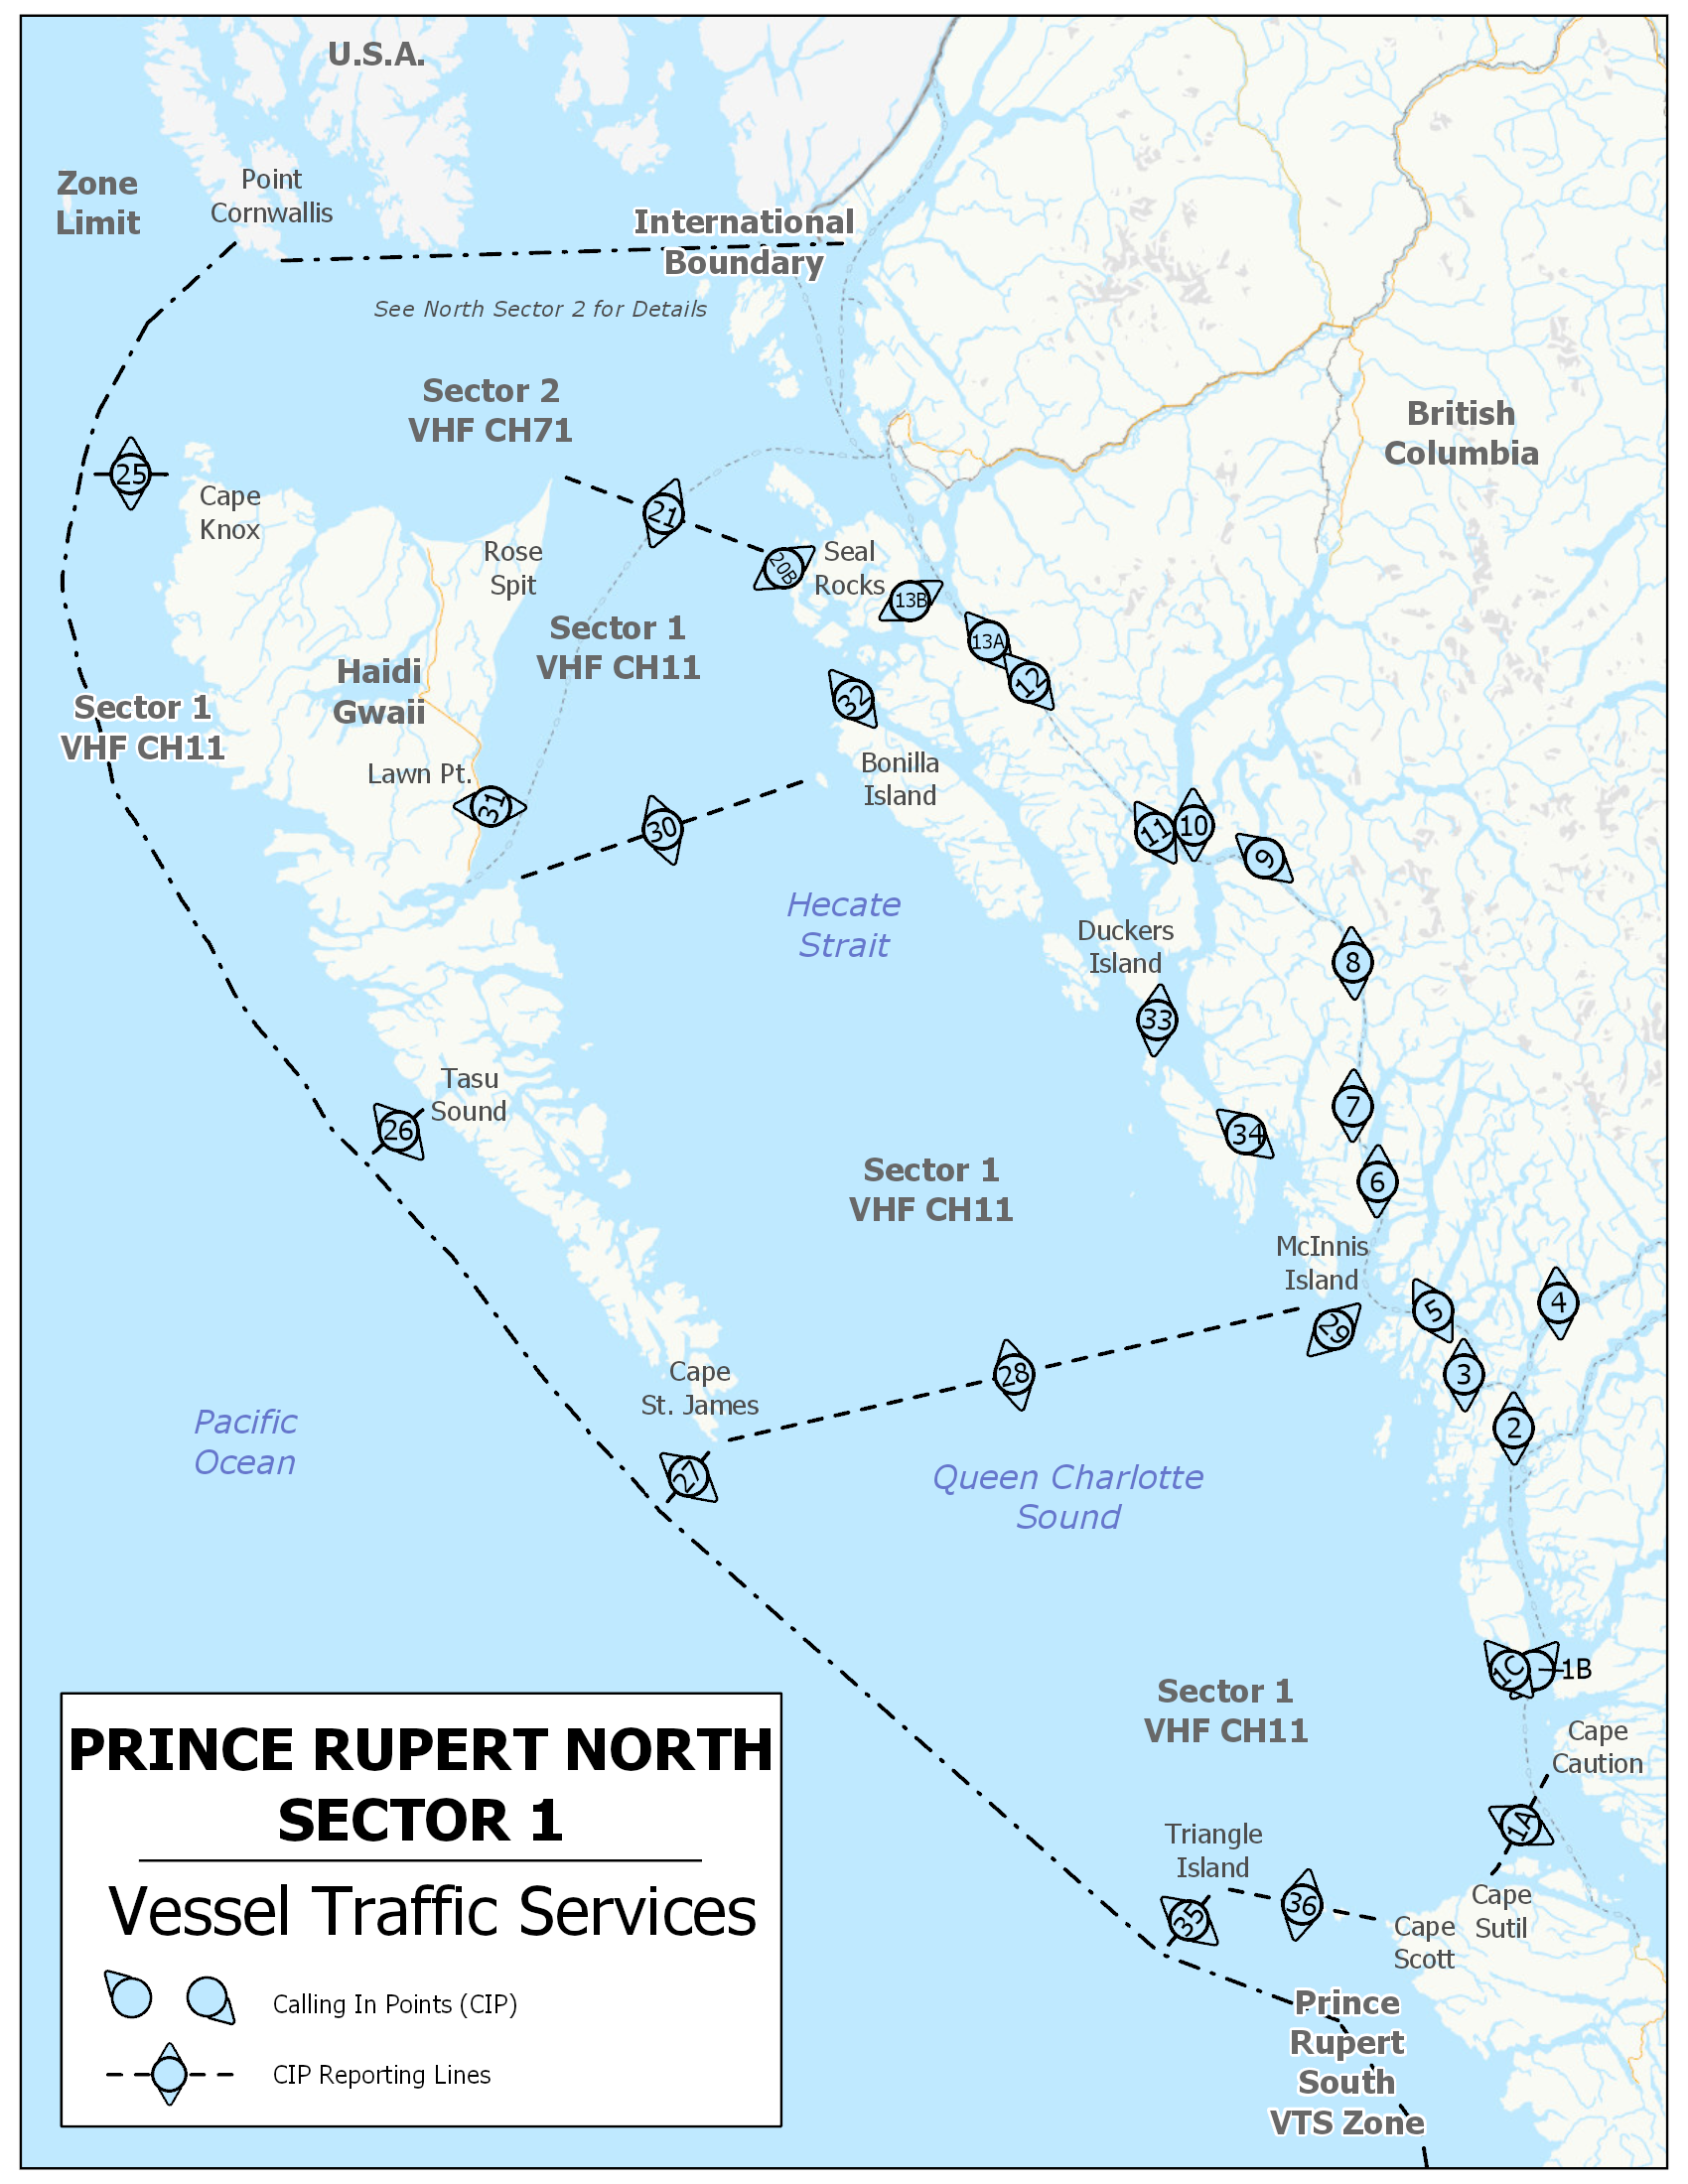 Prince Rupert - Vessel Traffic Services - Sector 1